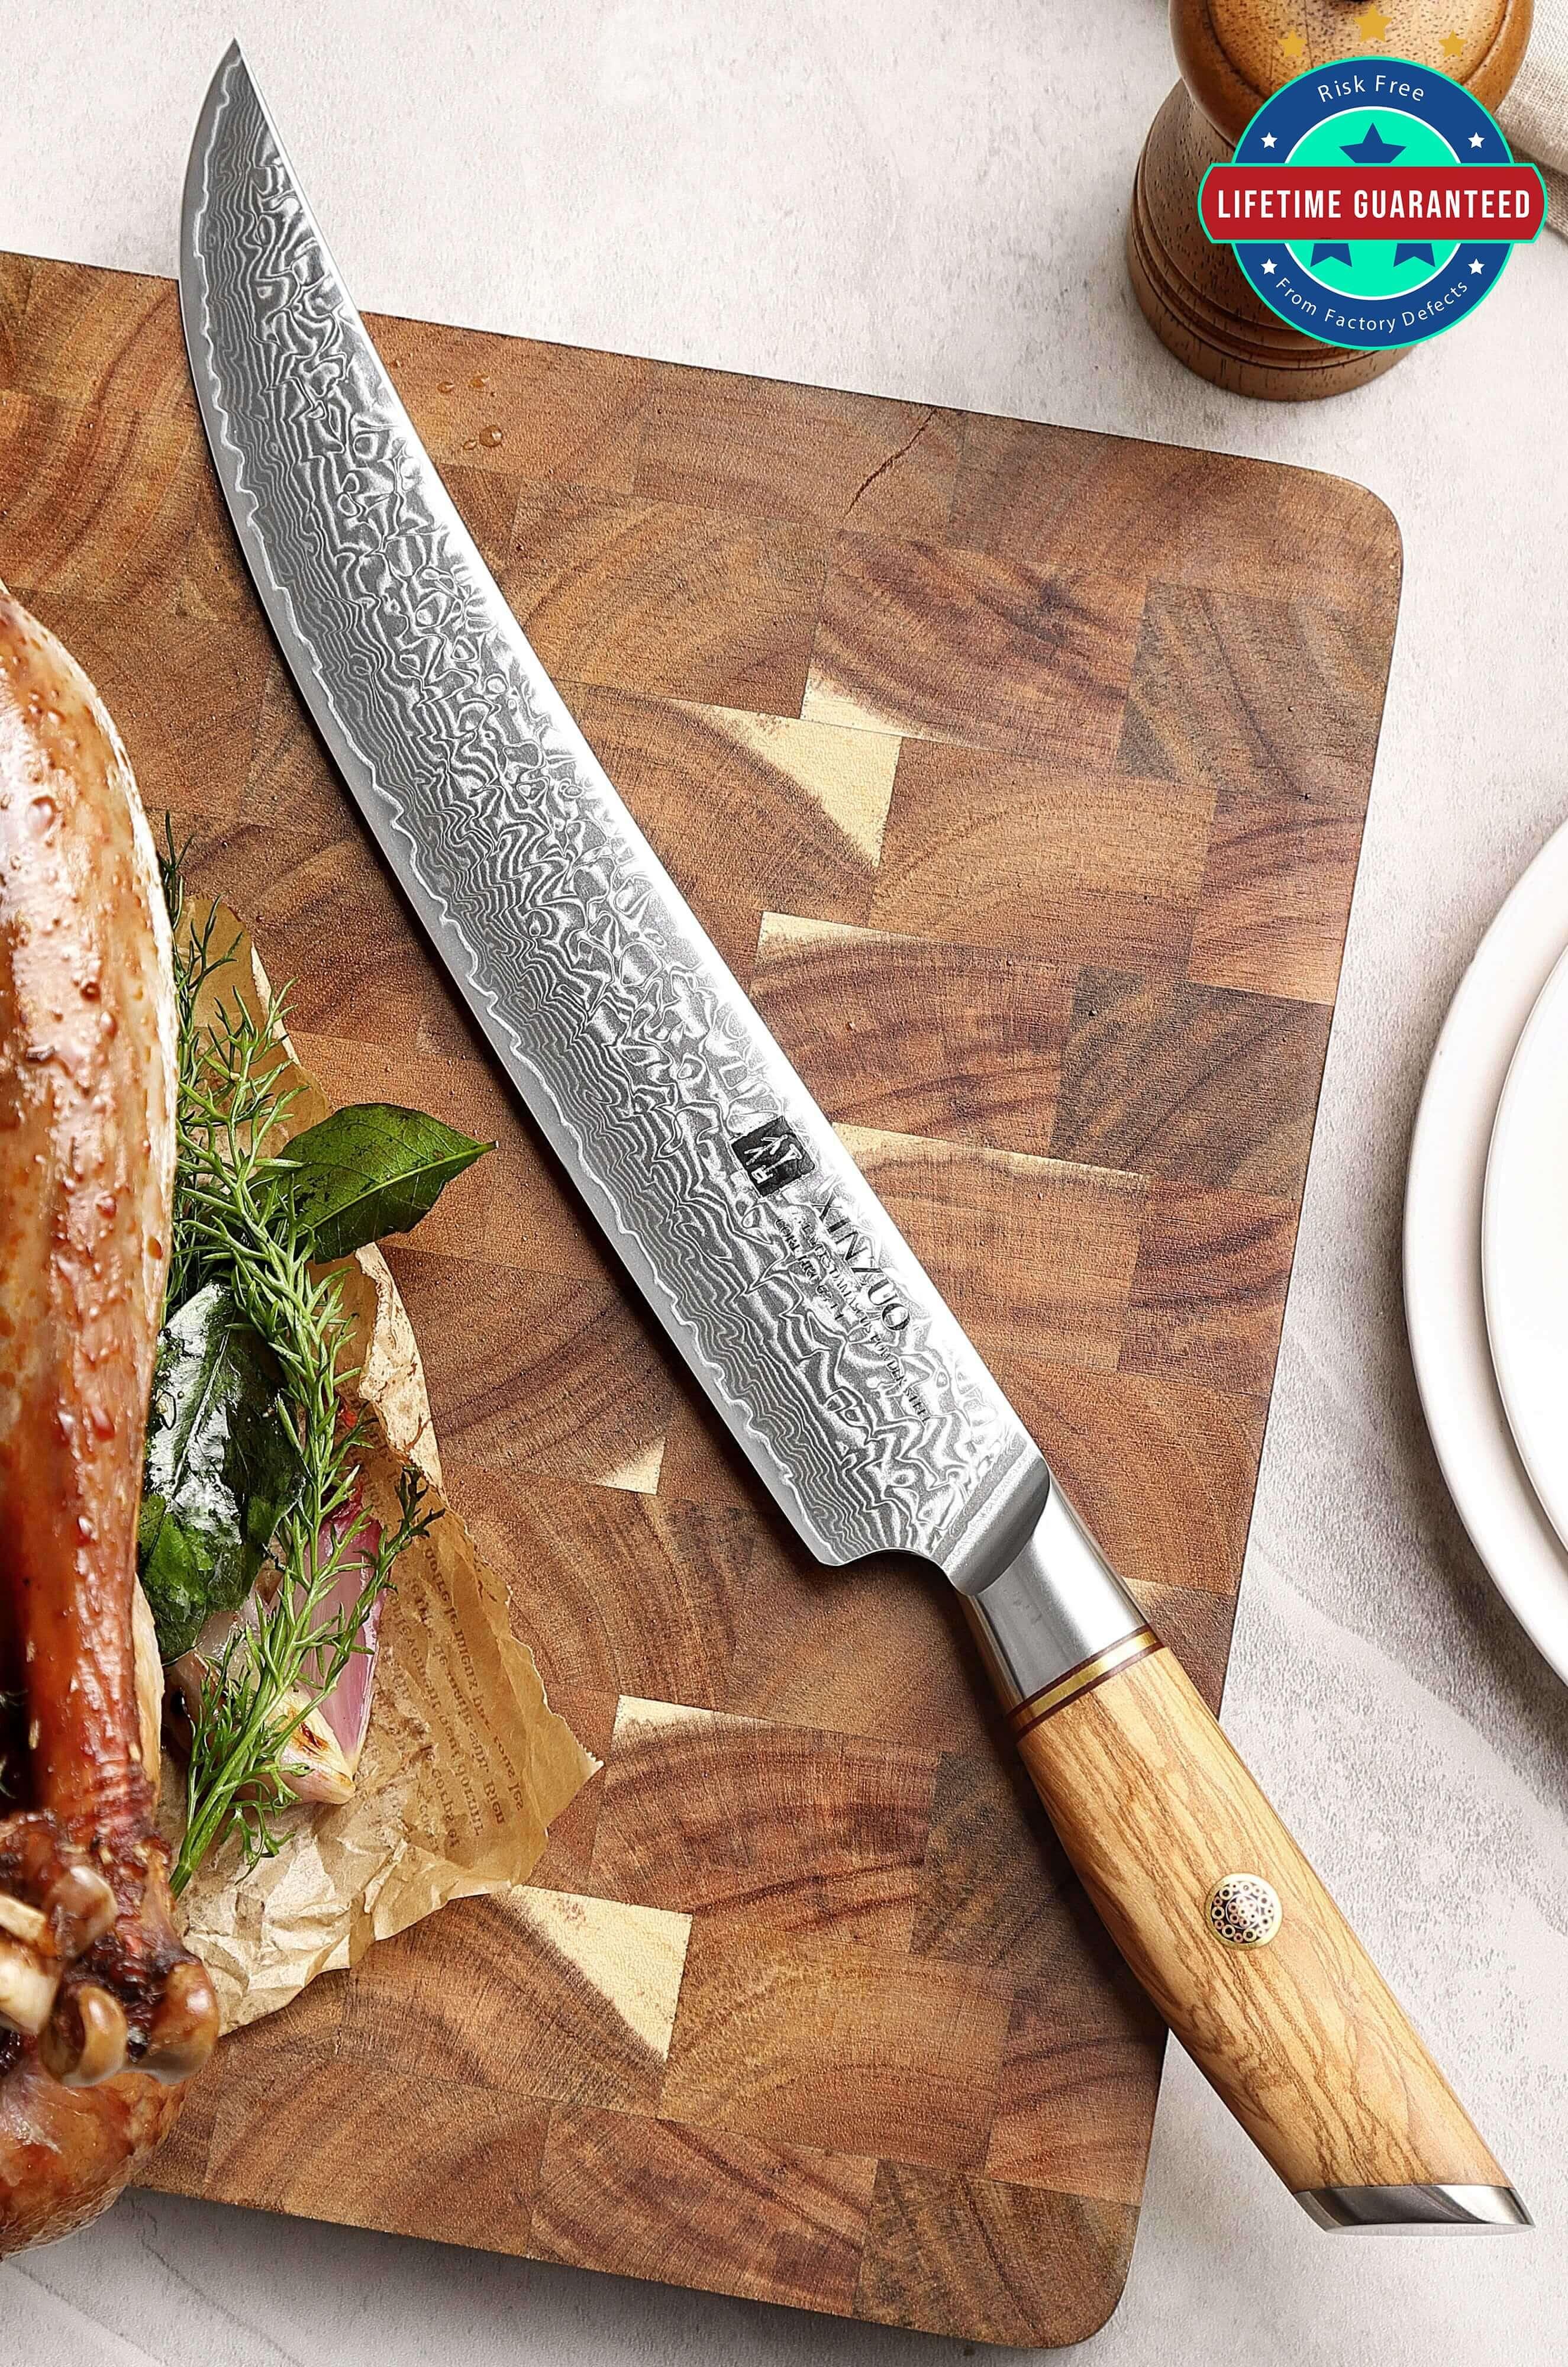 http://www.thebambooguy.com/cdn/shop/files/Xinxuo-B37-Japanese-Damascus-73-Layers-Powder-Steel-Kitchen-Carving-Knife.jpg?v=1692401846